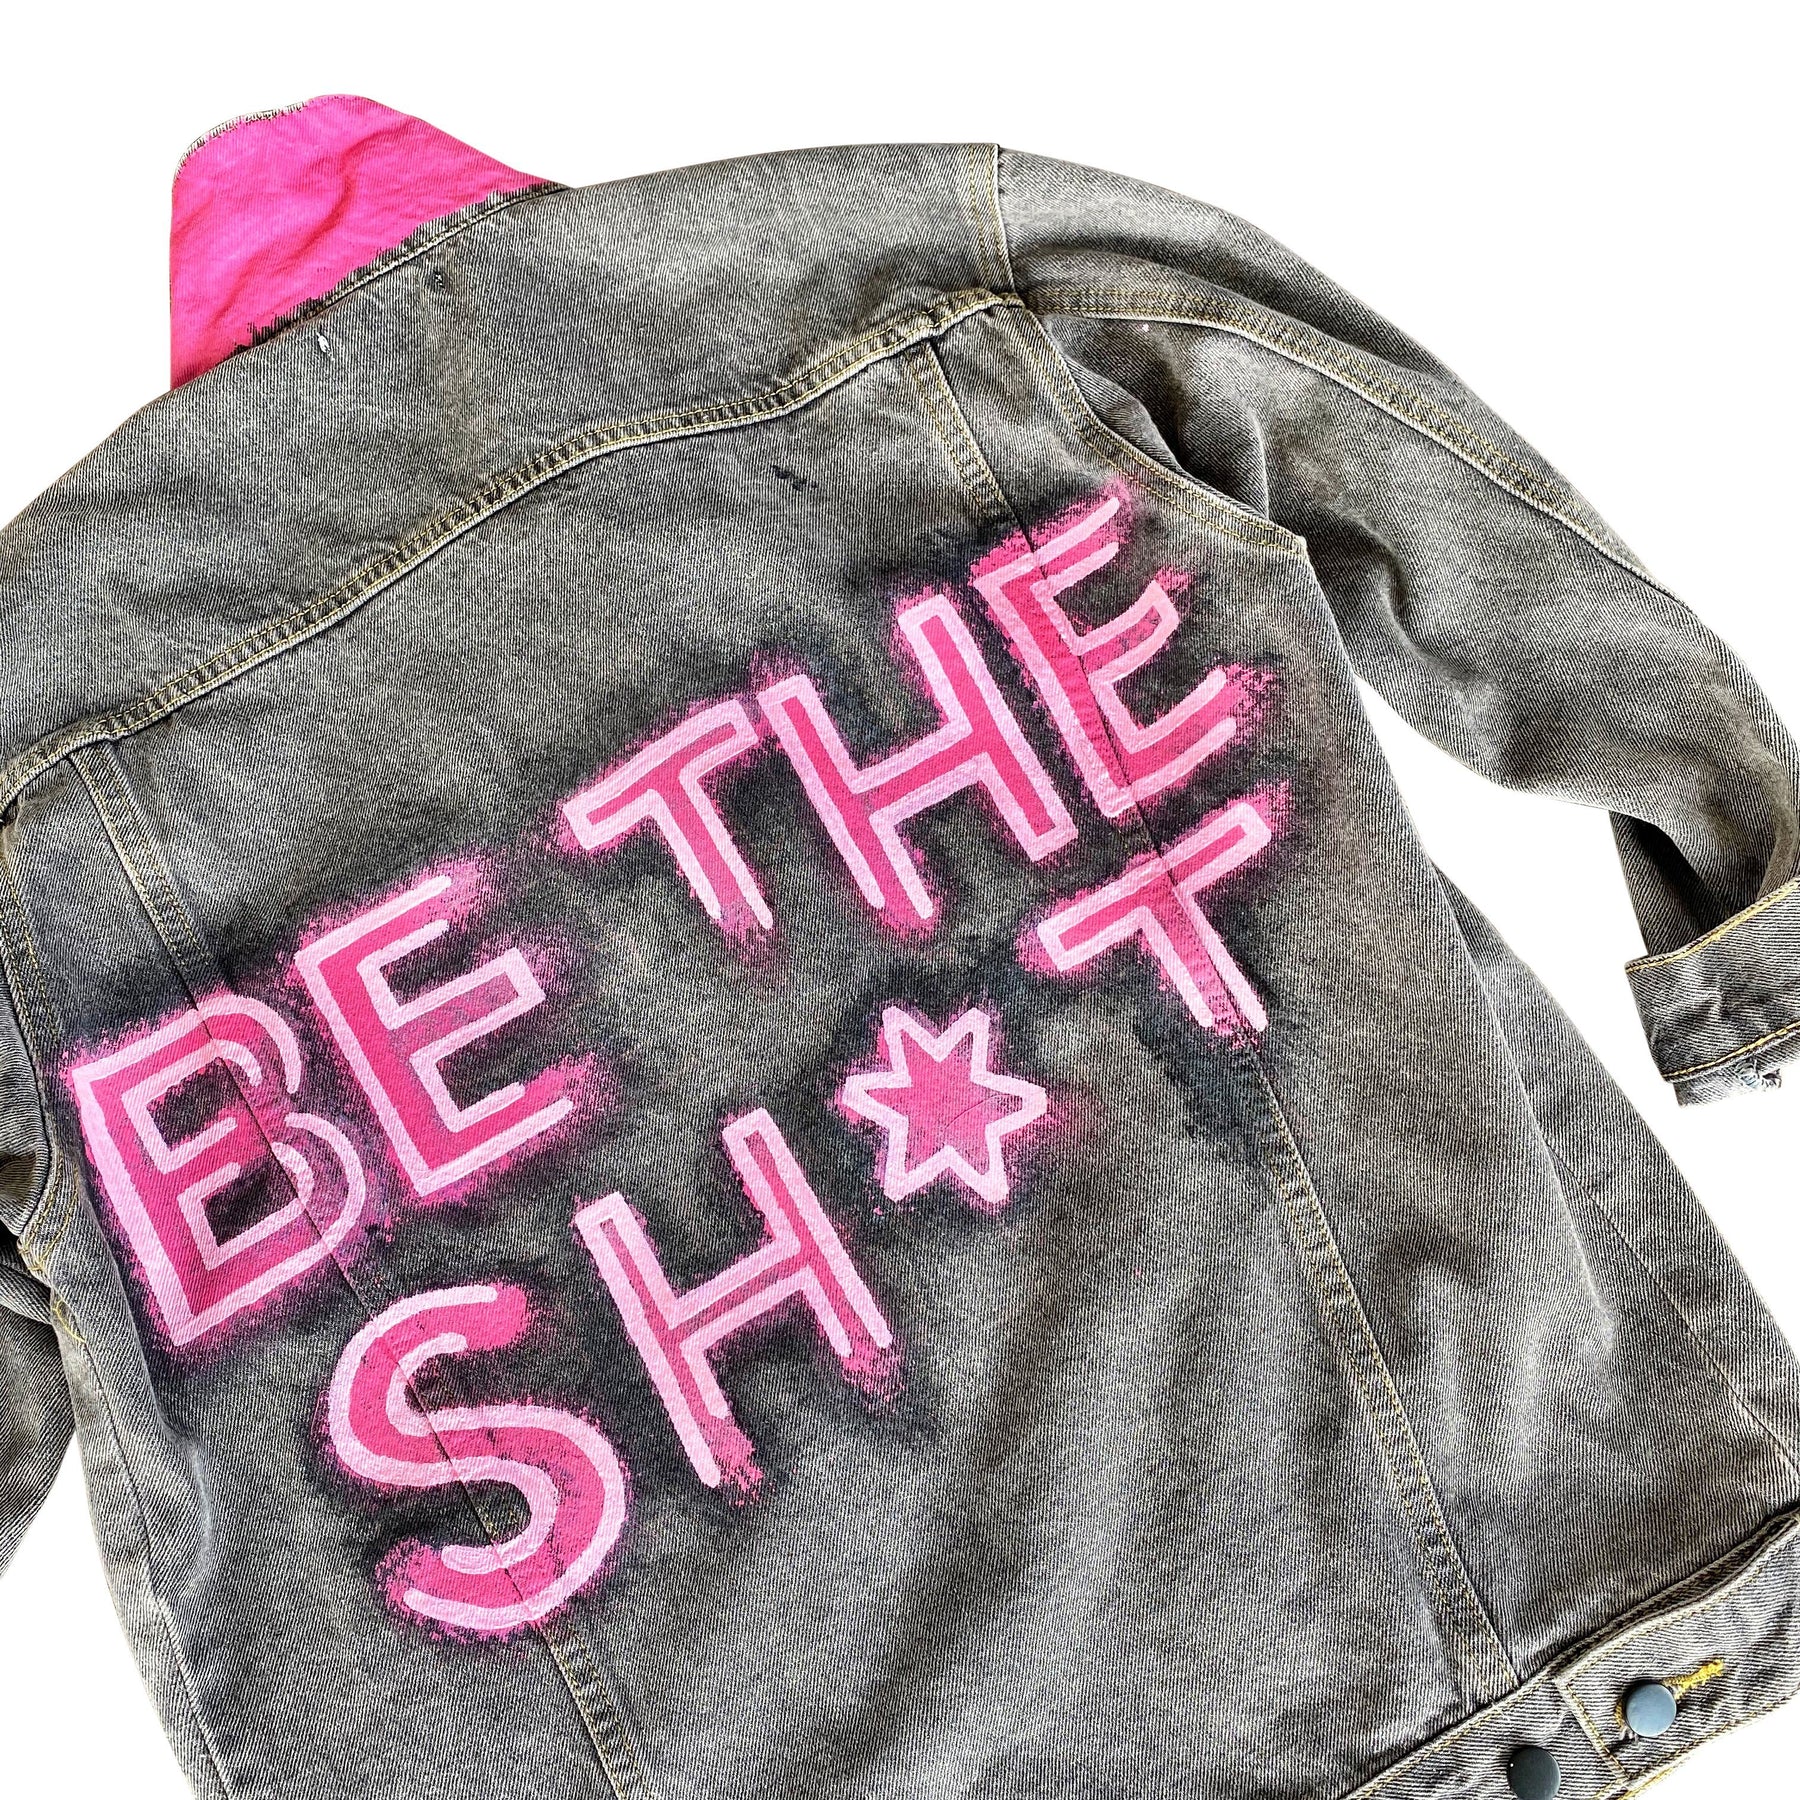 Faded black denim. BE THE SH*T logo painted on back in neon effect in bright pink. Collar and front pockets painted white. Signed @wrenandglory.